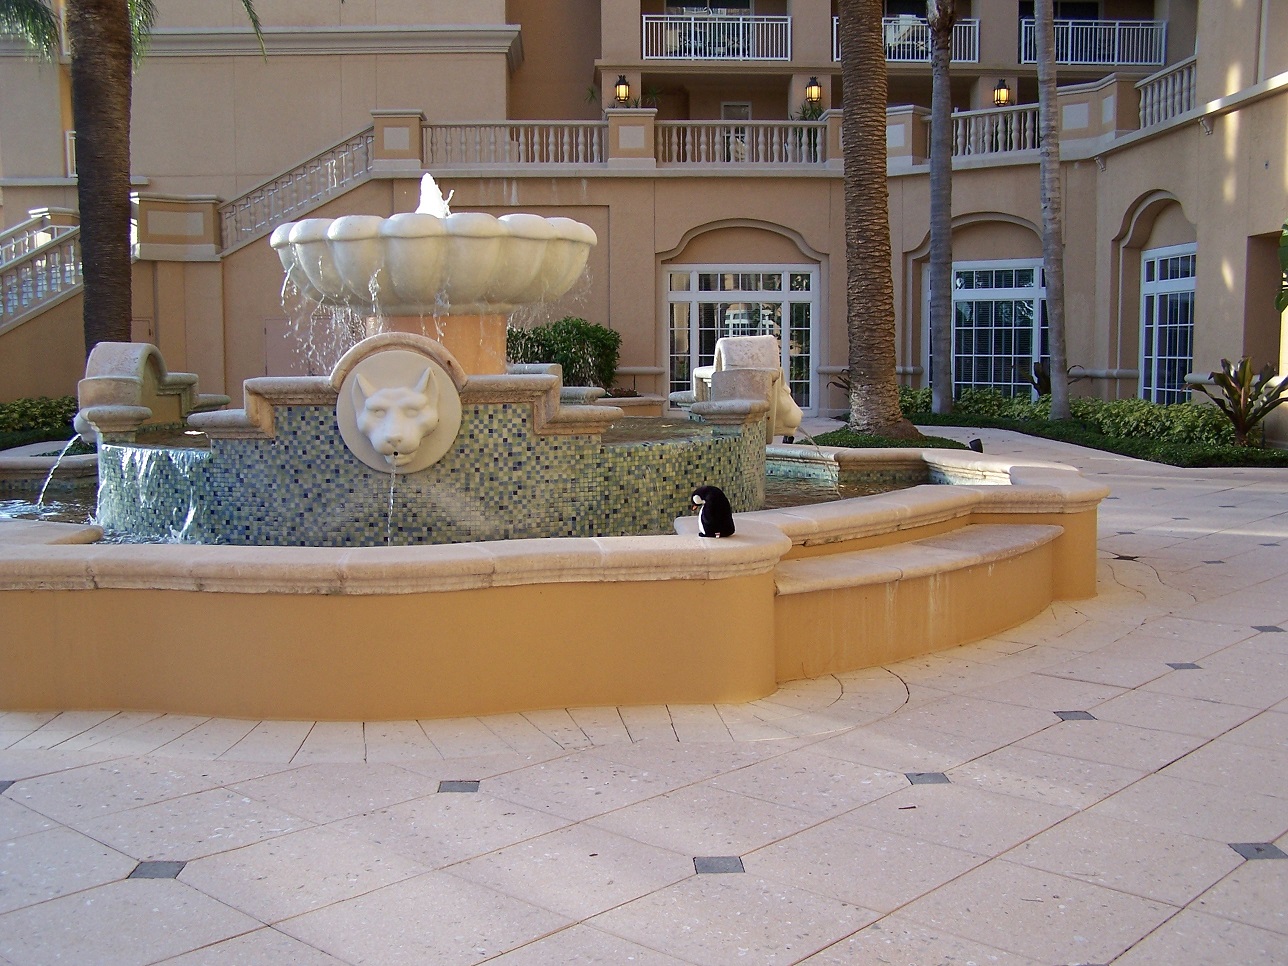 Attached picture 7718943-Admfountain.jpg